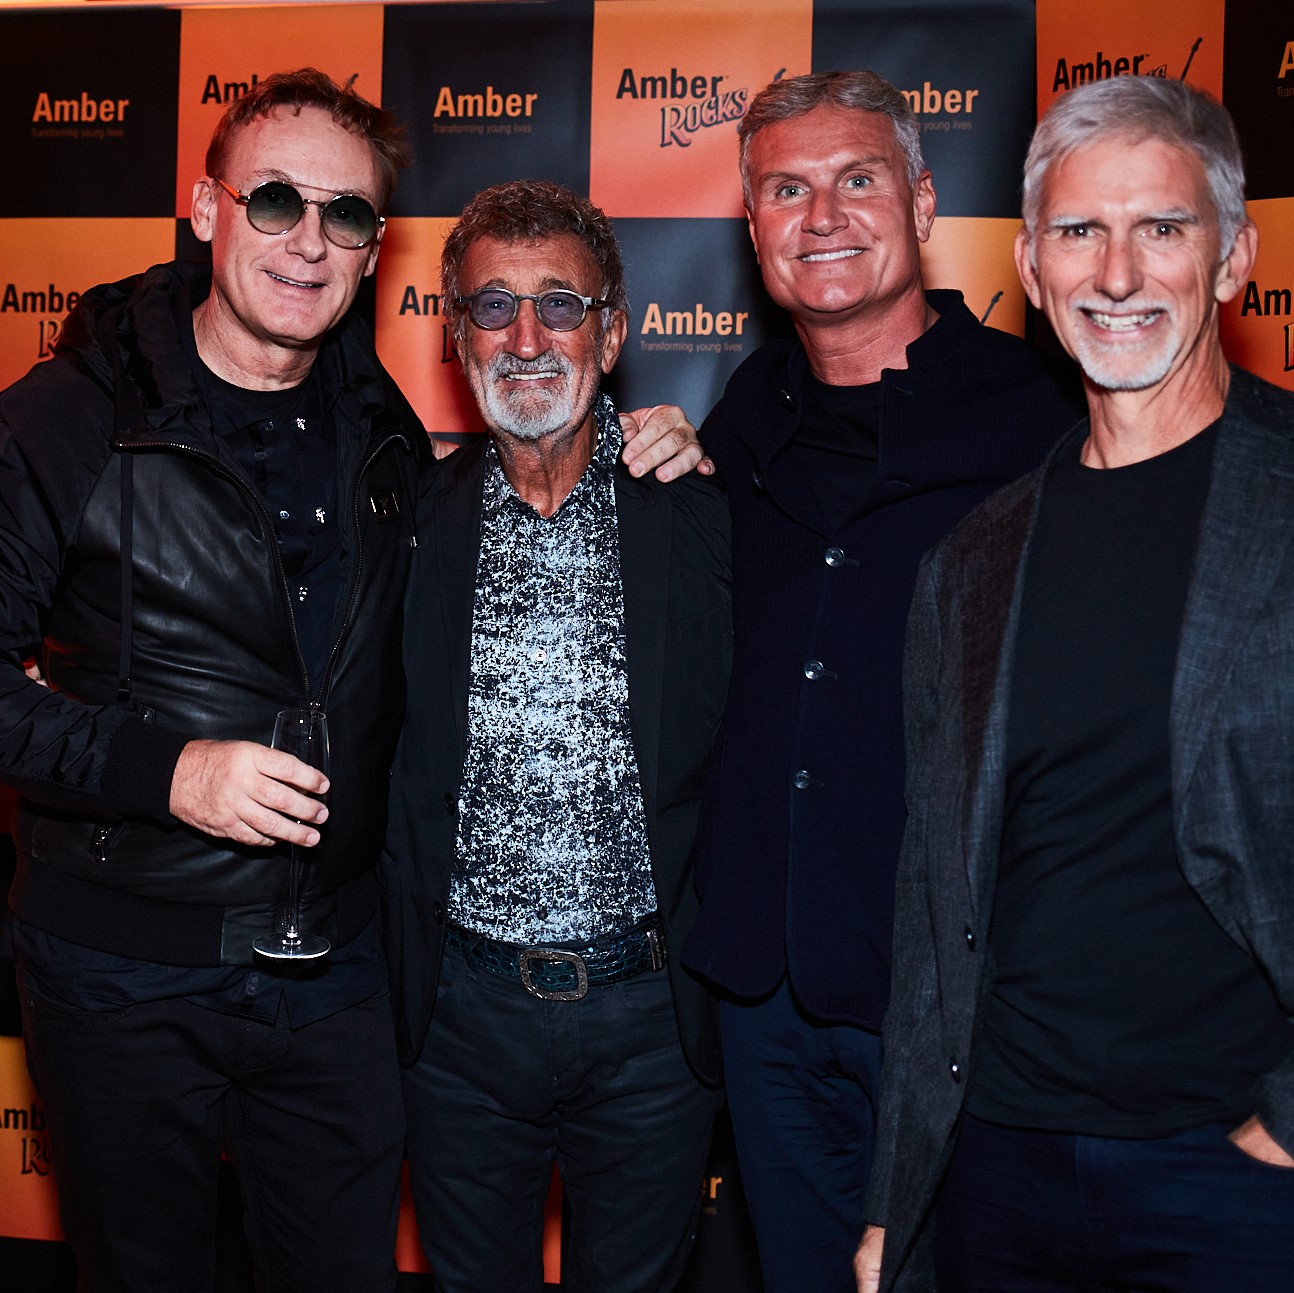 From left to right Bertrand Garchot, Eddie Jordan, David Coulthard and Damon Hill. All smiling at camera with an prange and black Amber Rocks background.